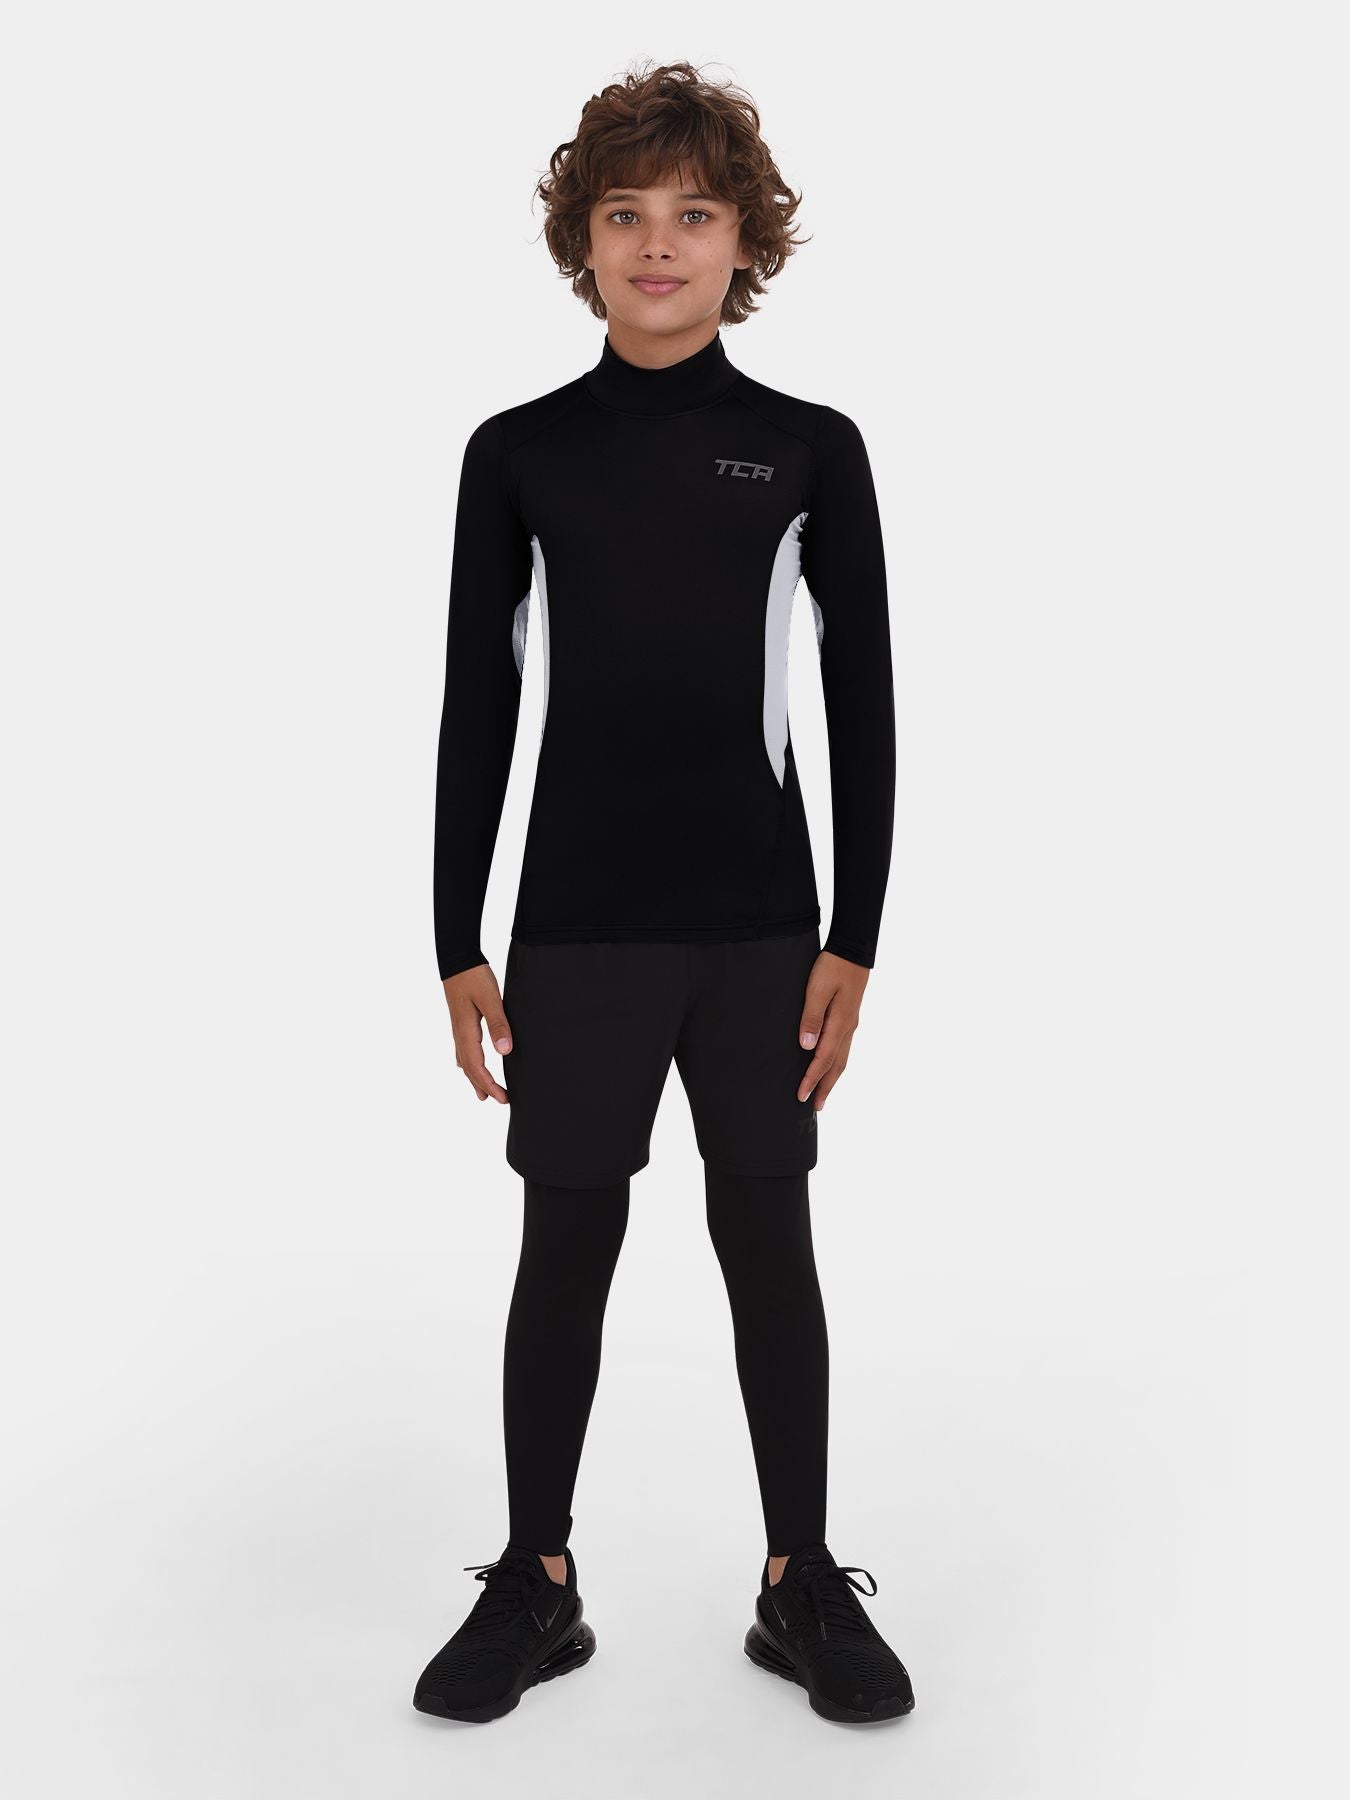 SuperThermal Compression Base Layer Long Sleeve Mock Neck For Boys With Brushed Inner Fabric